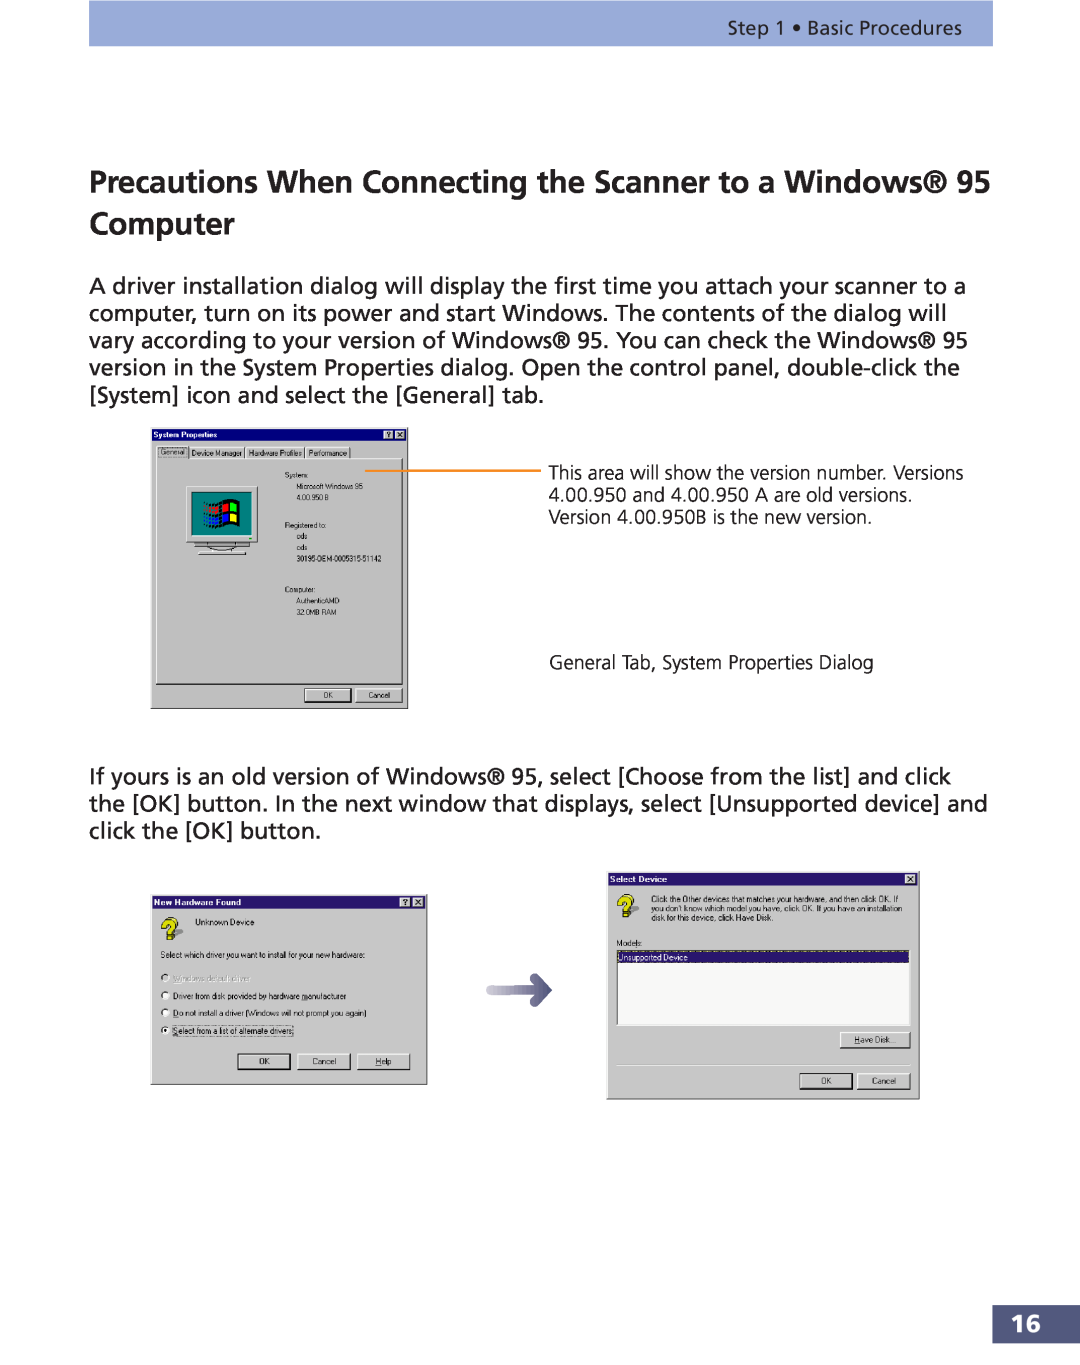 Canon FS 3.6 manual Precautions When Connecting the Scanner to a Windows 95 Computer 